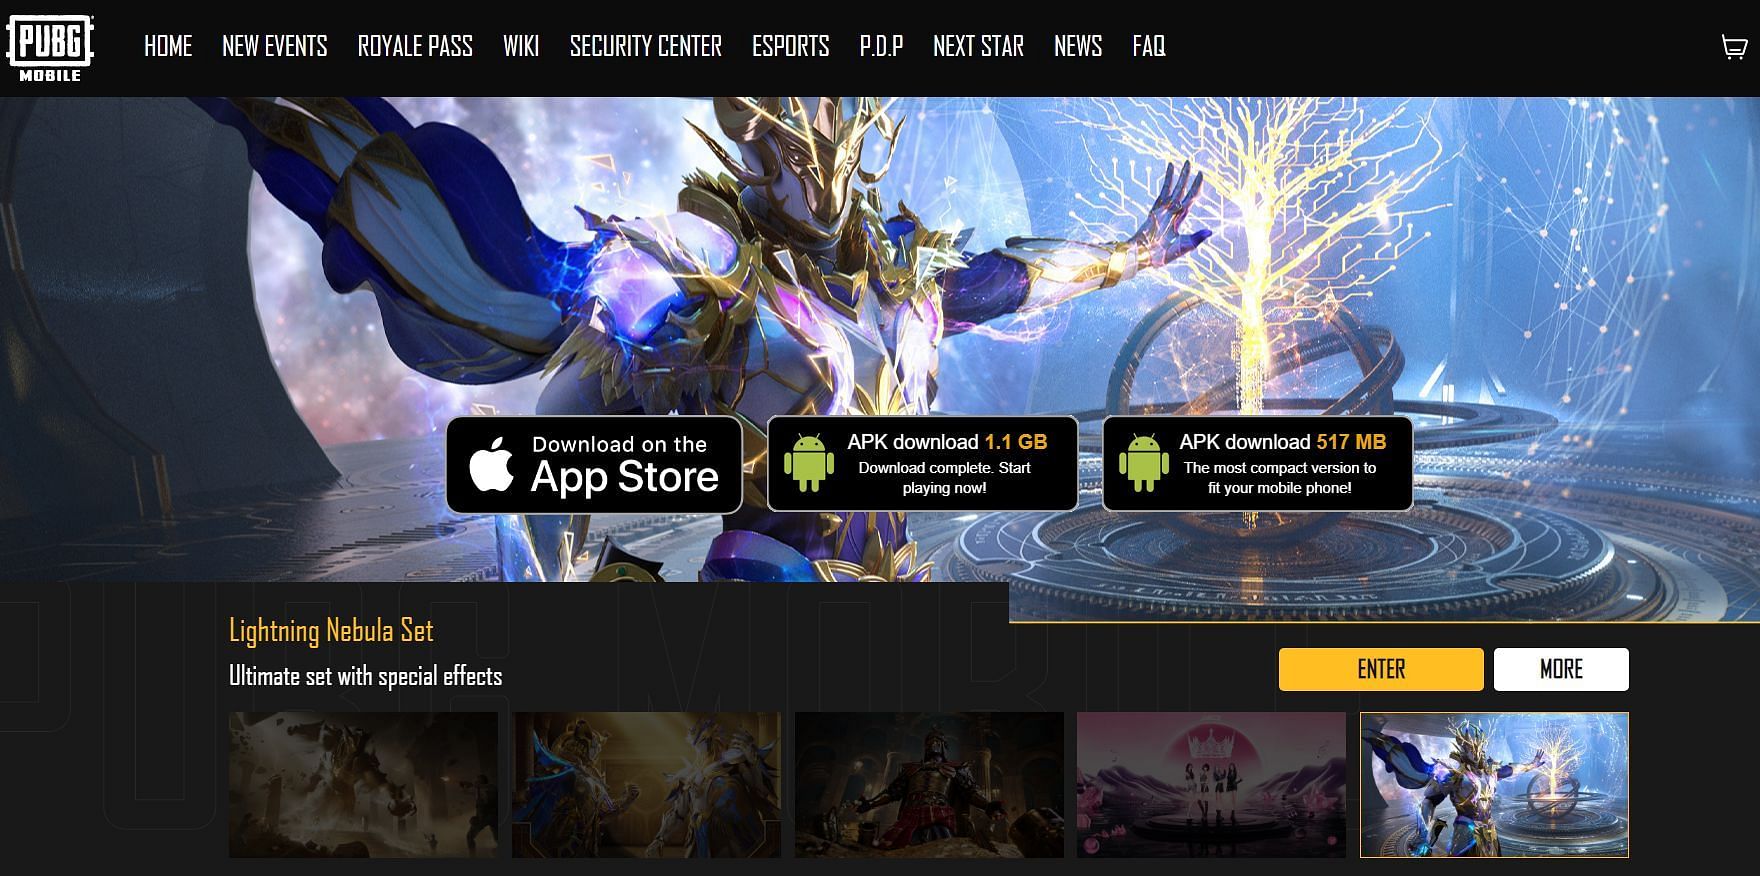 The official website on some servers shows two APK download links (Image via Krafton/Tencent Games)